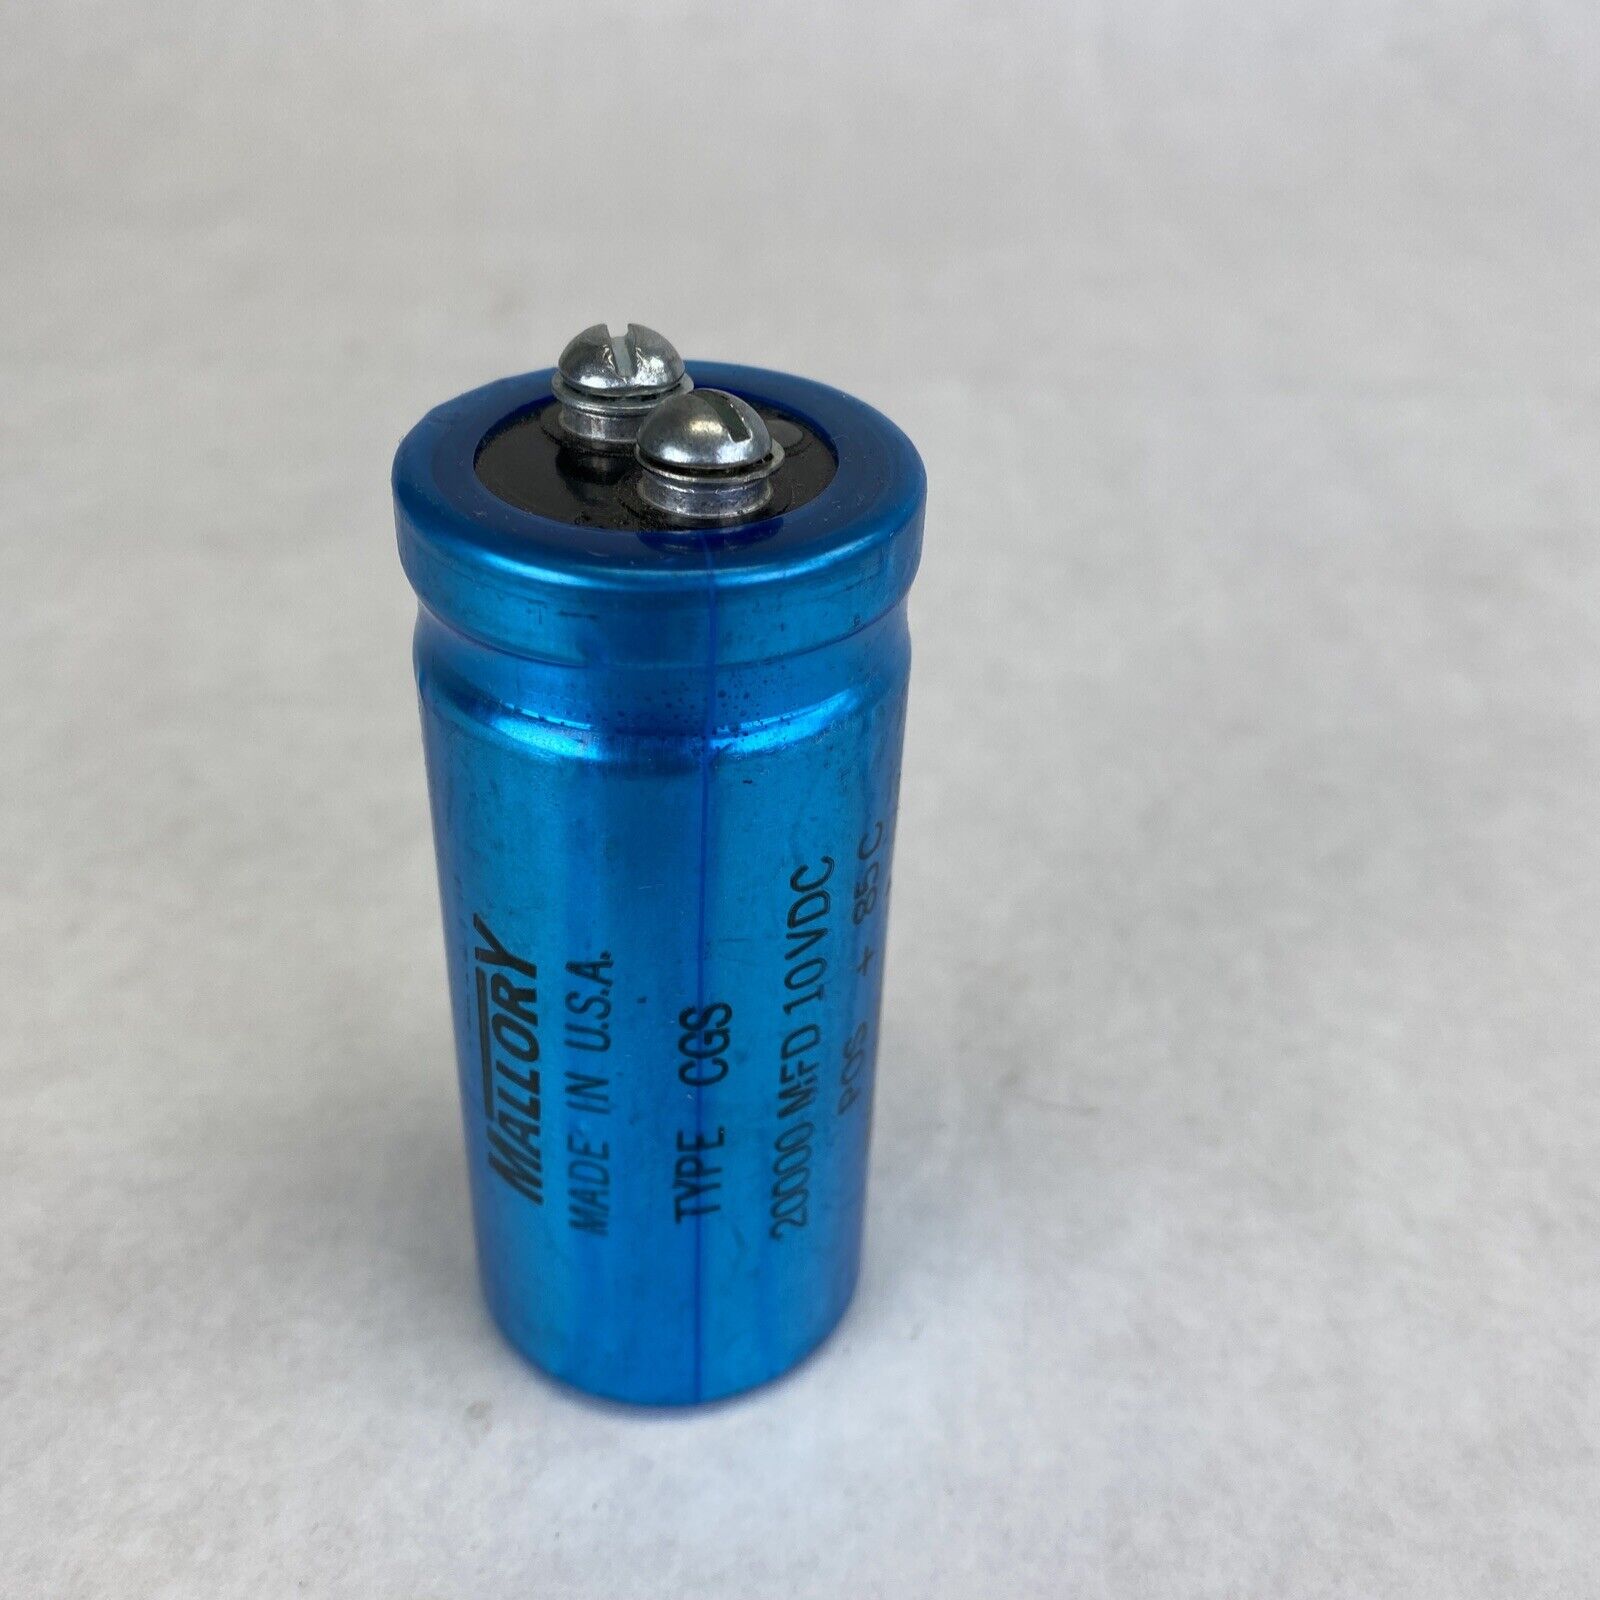 Mallory 235-7751A Electrolytic Capacitor 20000MFD 10VDC